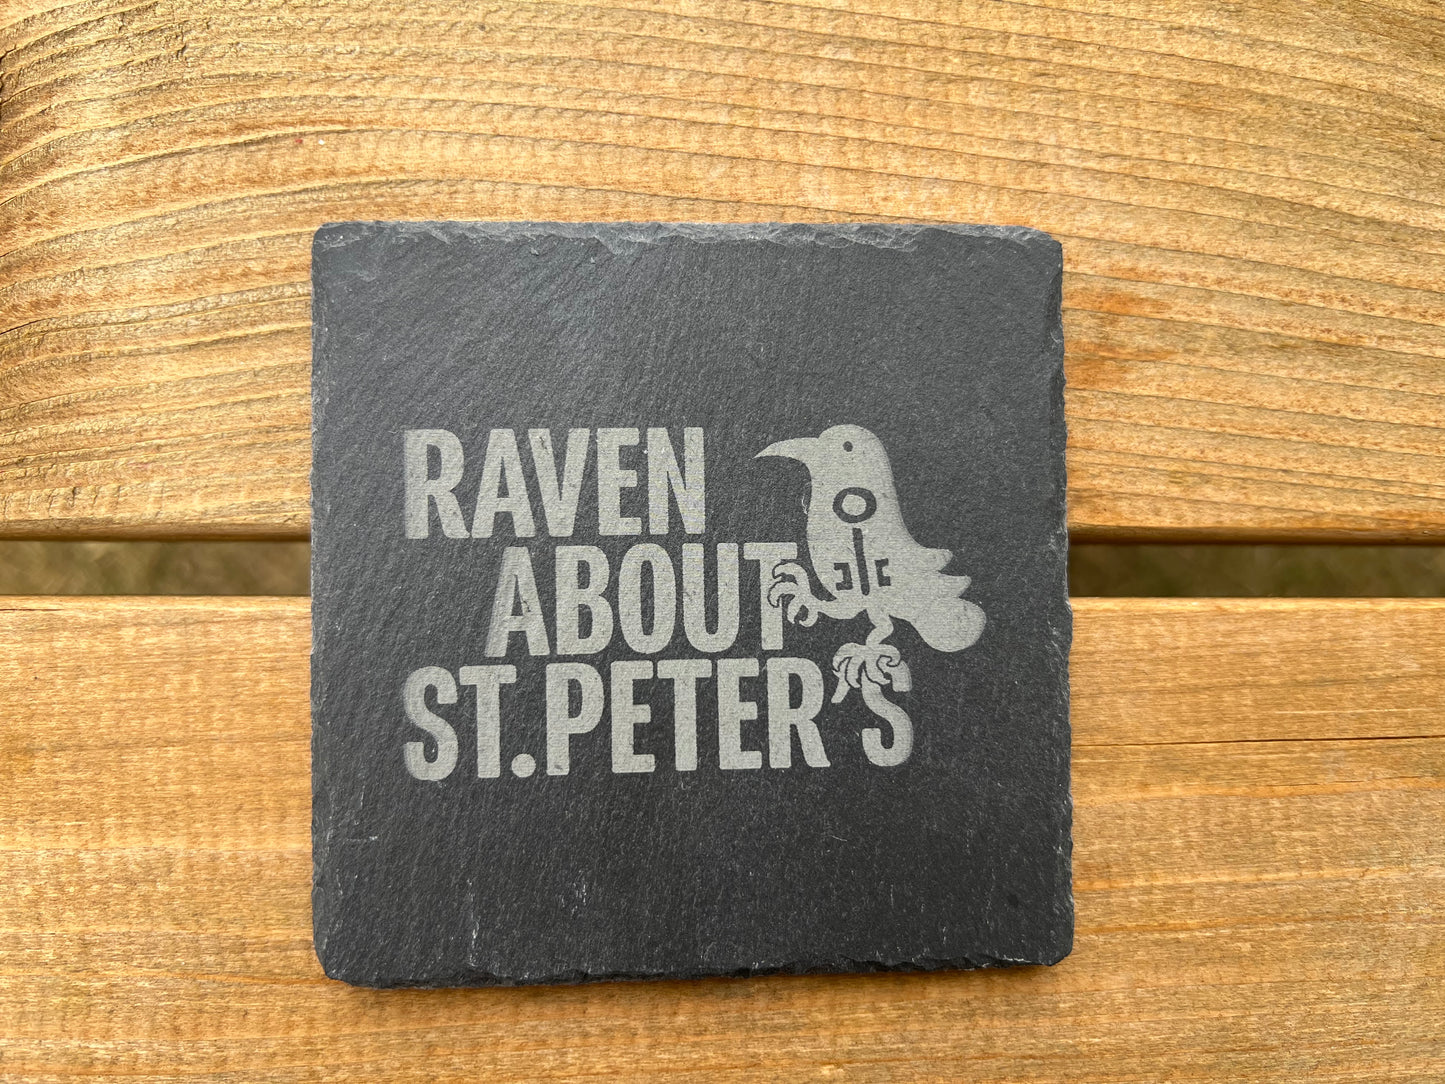 Pack of 4 St. Peter's Slate Coasters